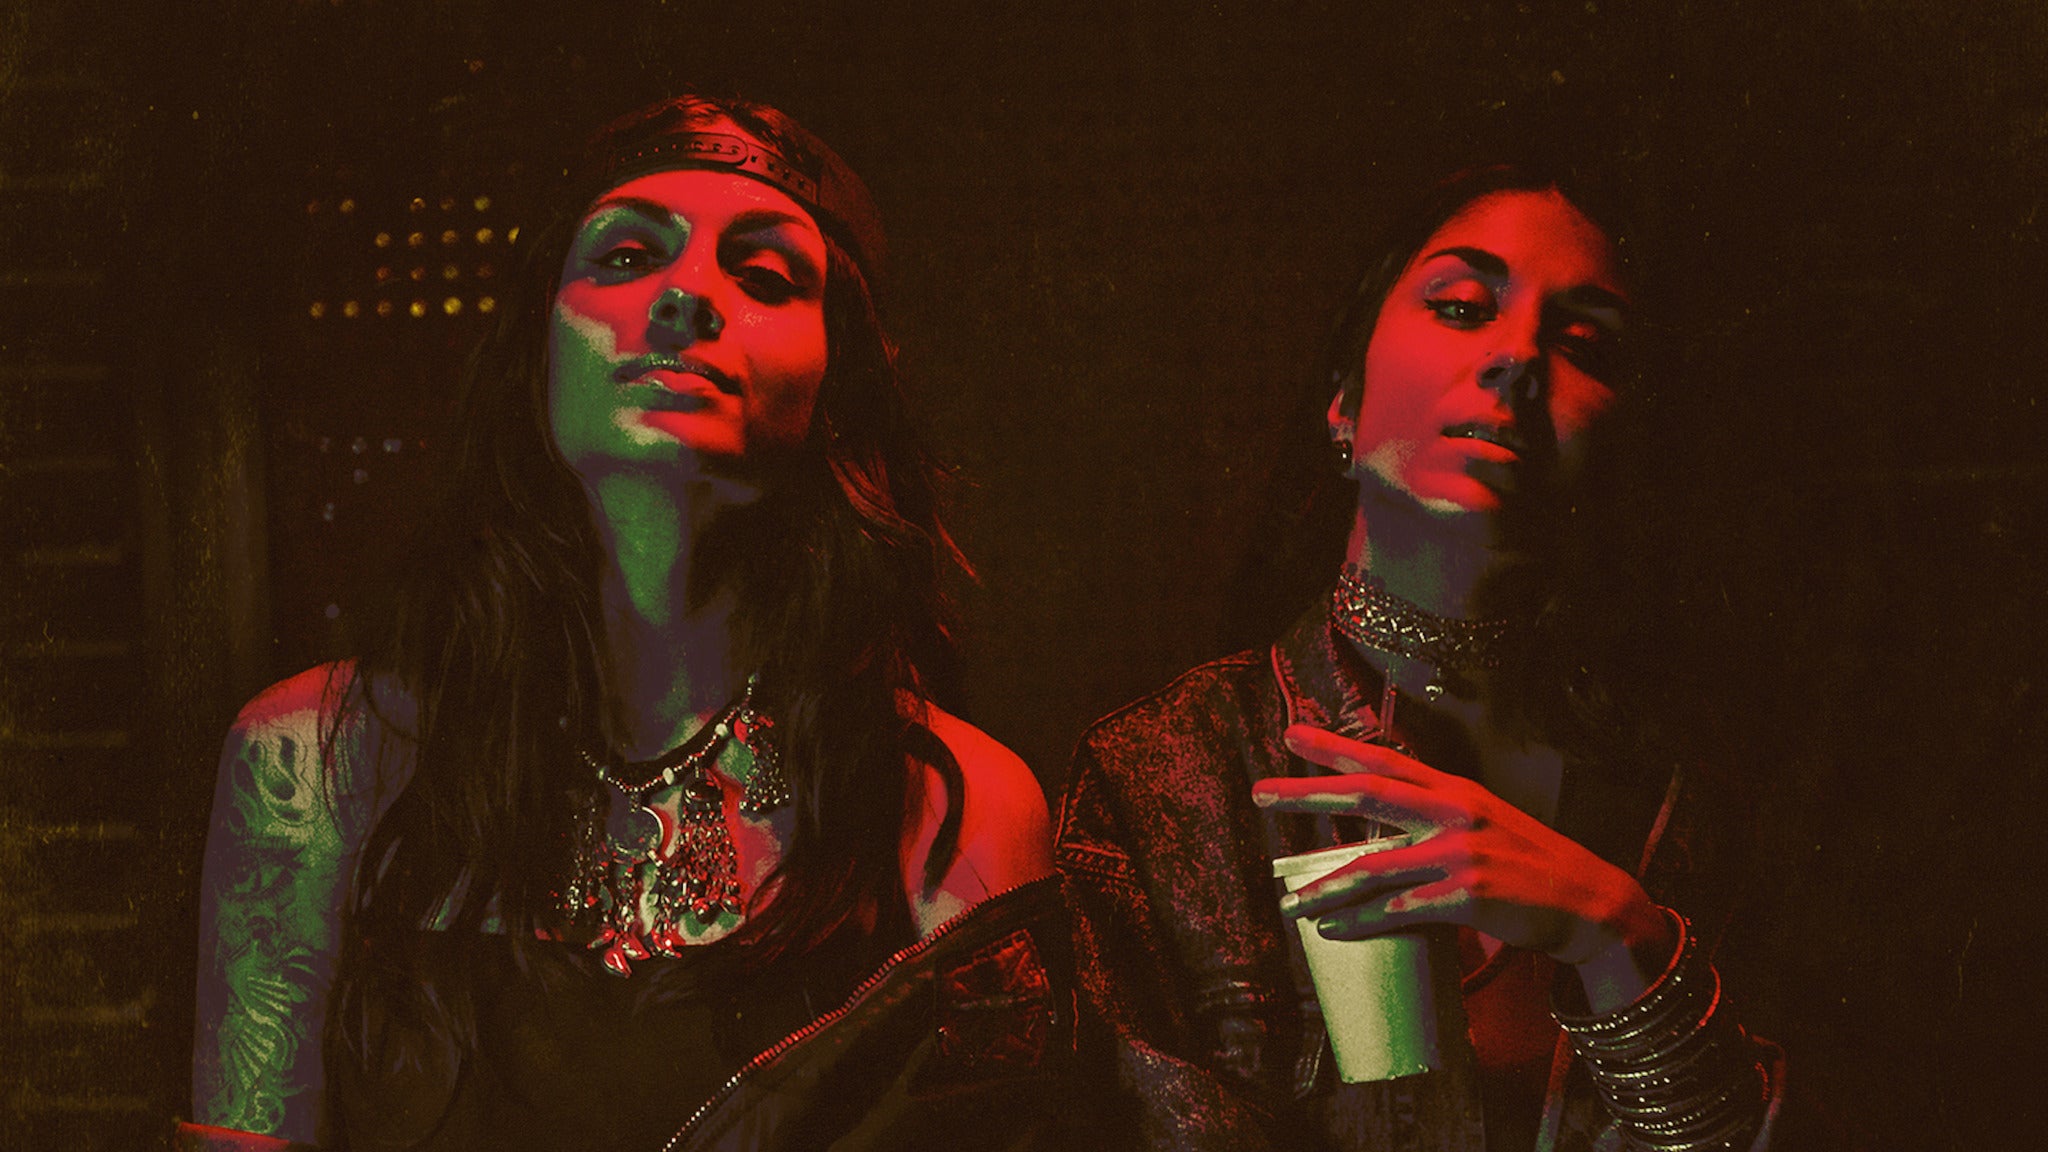 Krewella - New World Tour presented by SiriusXM BPM in St Louis promo photo for Artist presale offer code